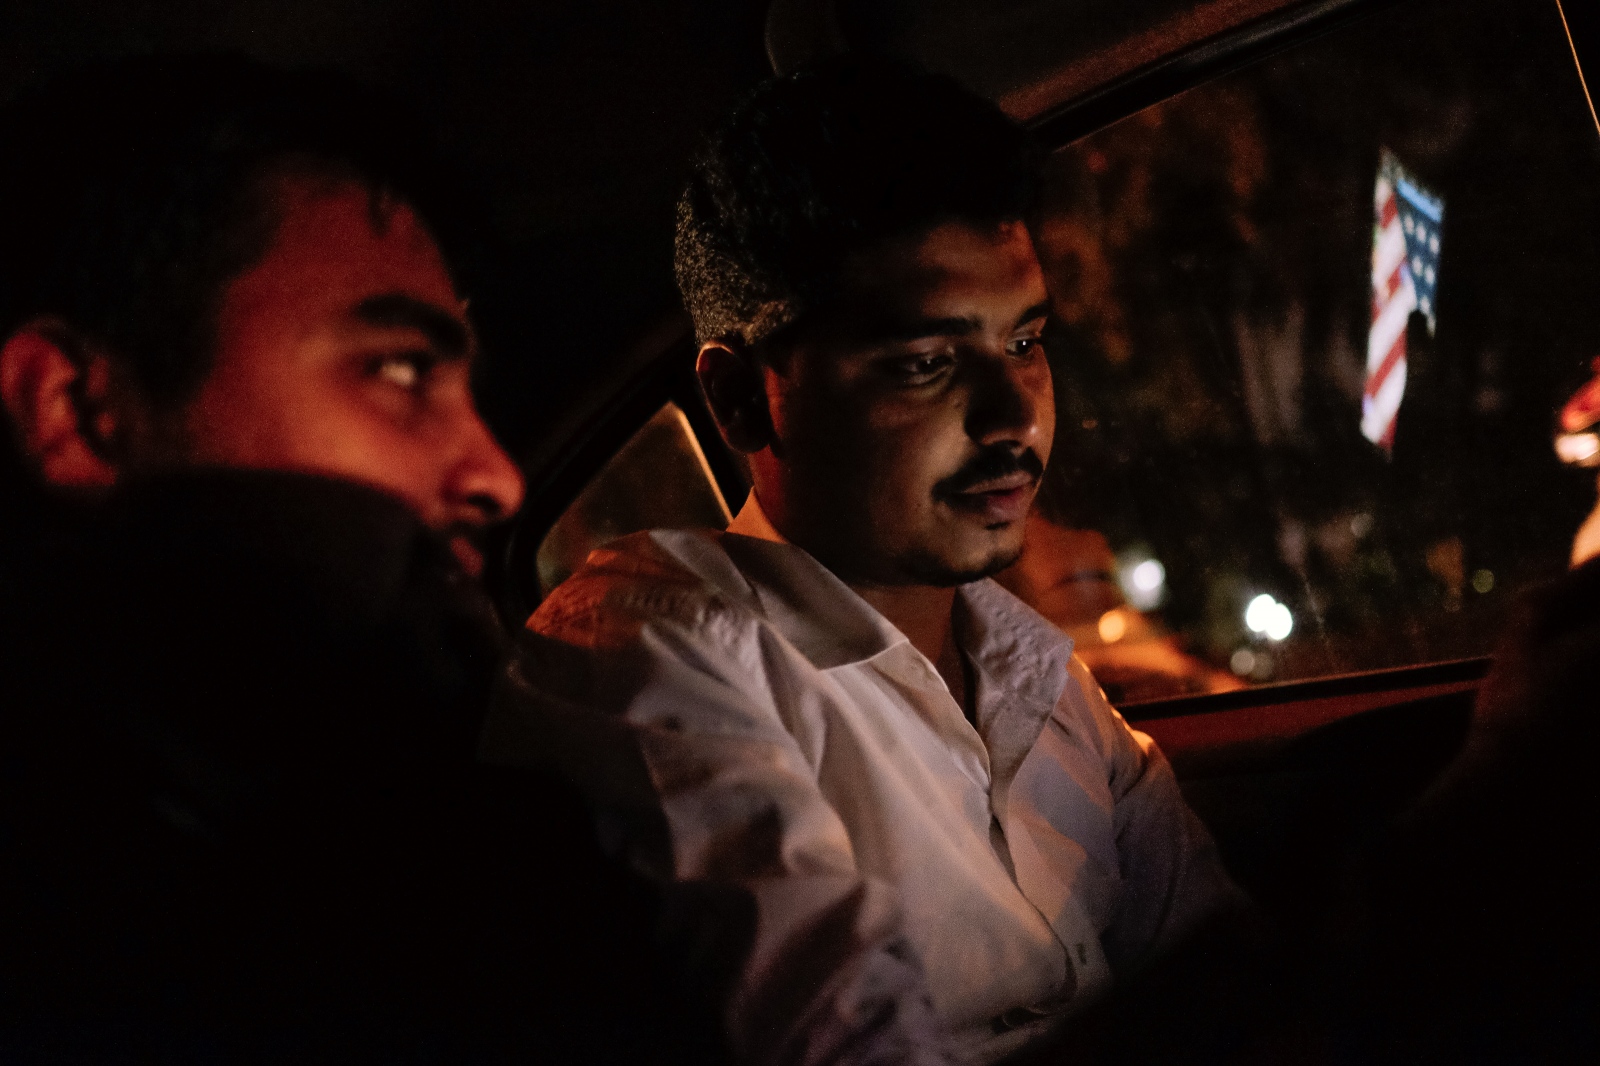 Ashrafali, (21), on his phone, is going out with friends to celebrate his birthday. He moved recently from a night shift to a day shift. &ldquo;In my other company doing night shift it was too much pressure. I used to make 200 calls per night to the USA.&rdquo; Before, he was trained to become a pilot but due to financial problems he started working in a call centre to save money and fulfil his dream. The Pilot course in India costs around 45,000 USD. Navi Mumbai, India. 11th March 2016.